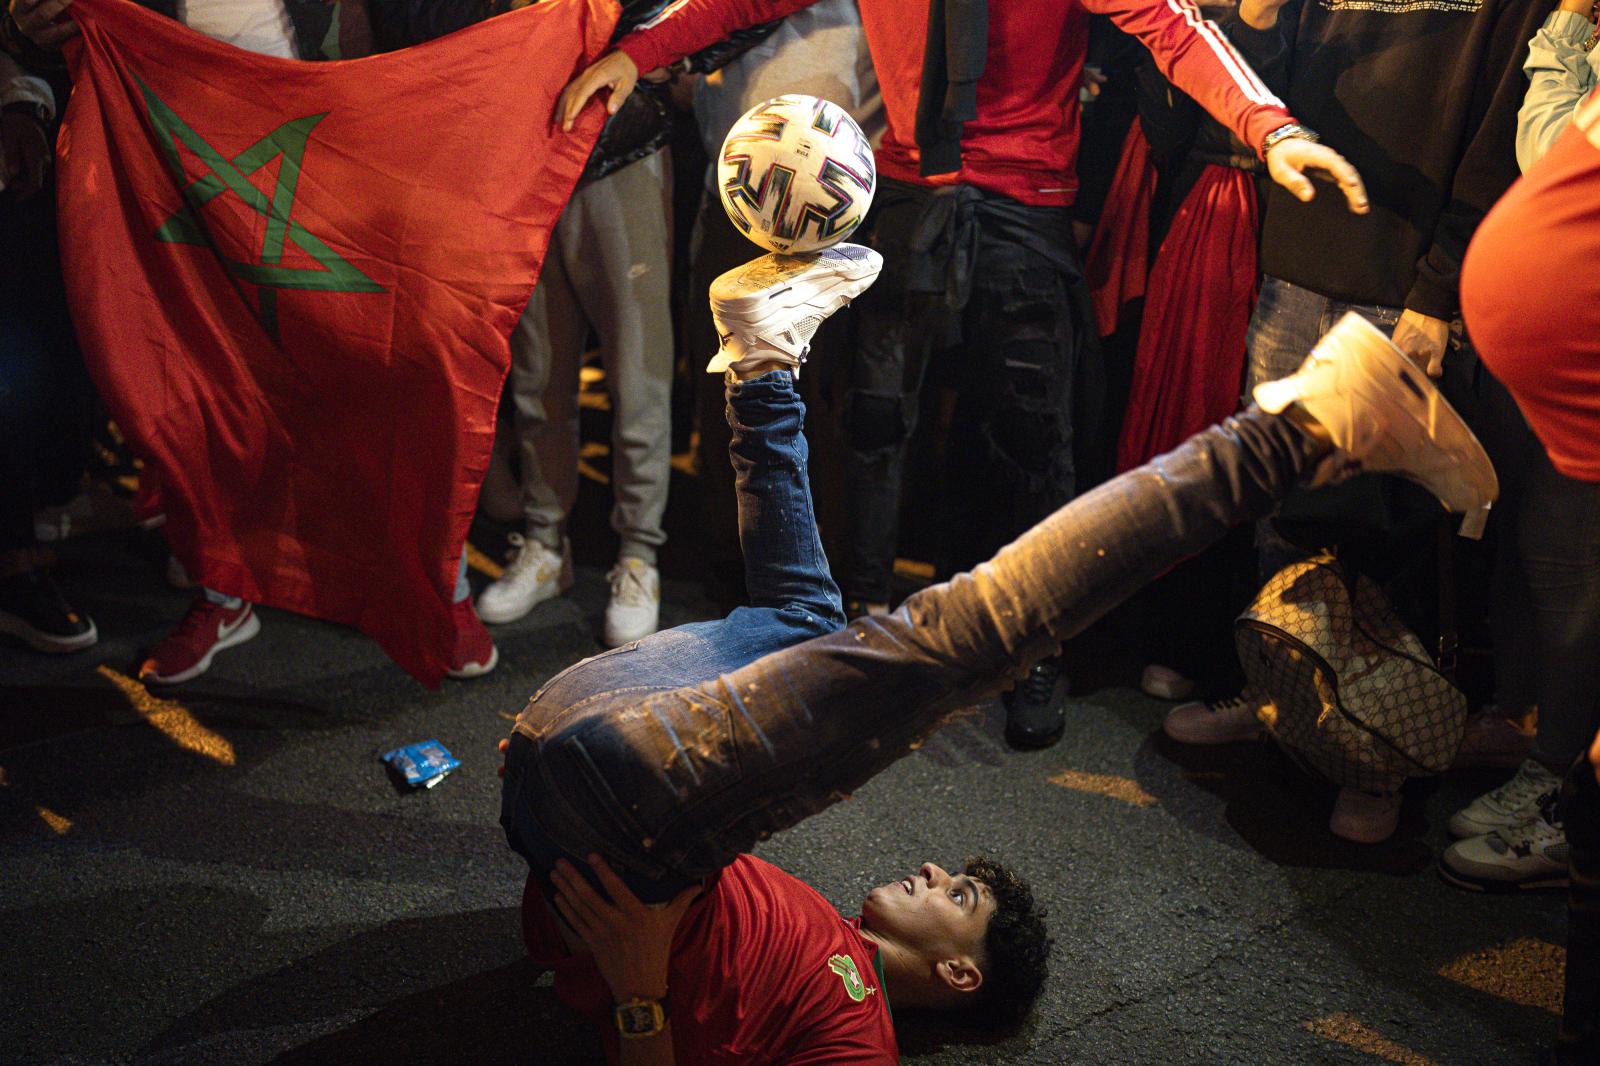 Image from DAILY NEWS - A Morocco fans juggles with a soccer ball during...